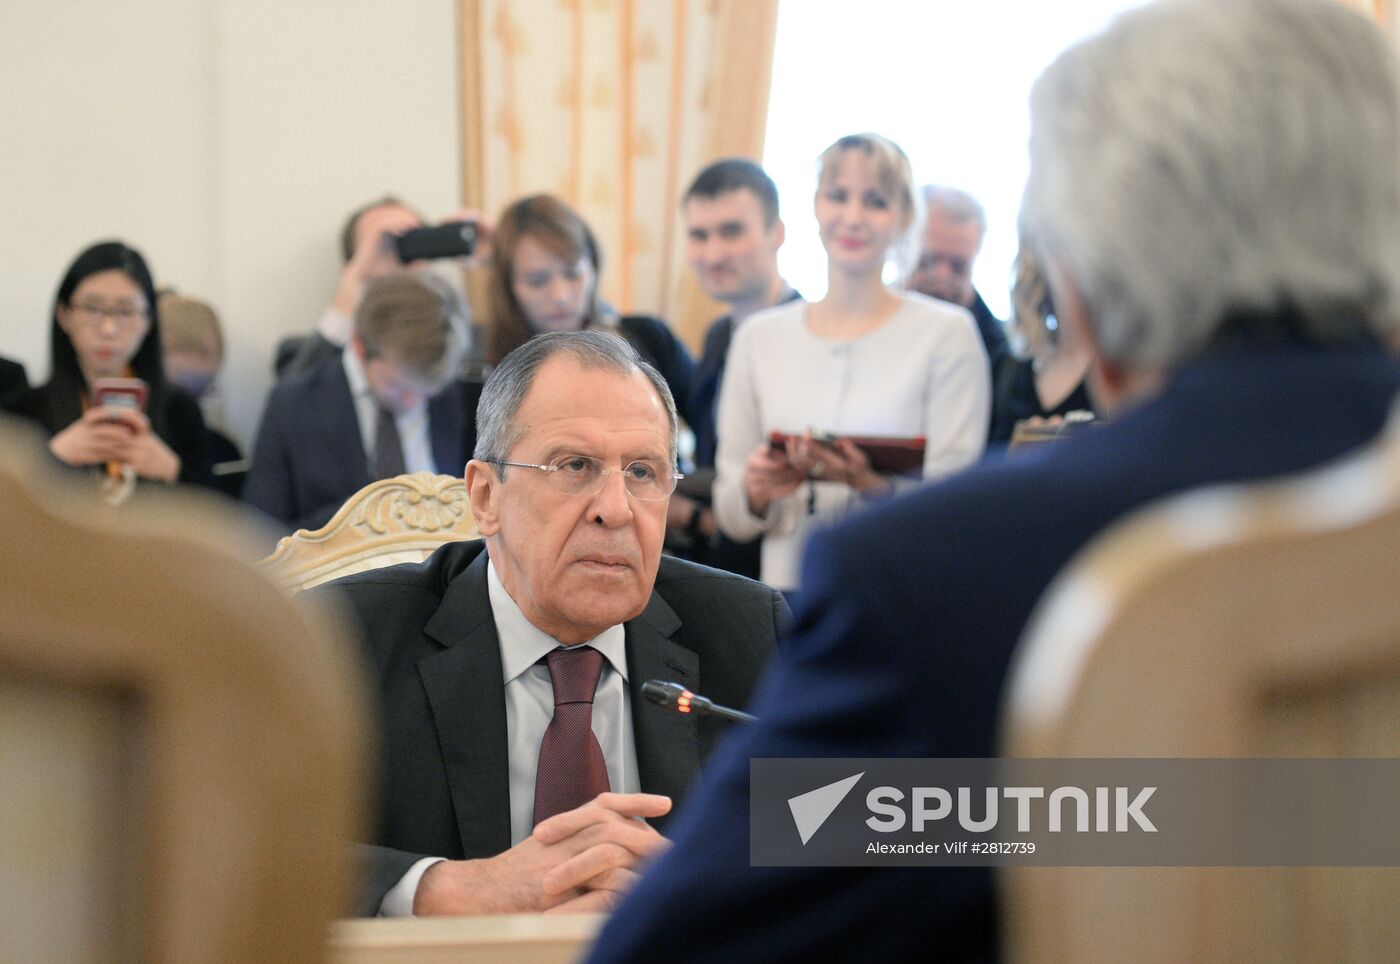 Russian Foreign Minister Sergei Lavrov meets with US Secretary of State John Kerry